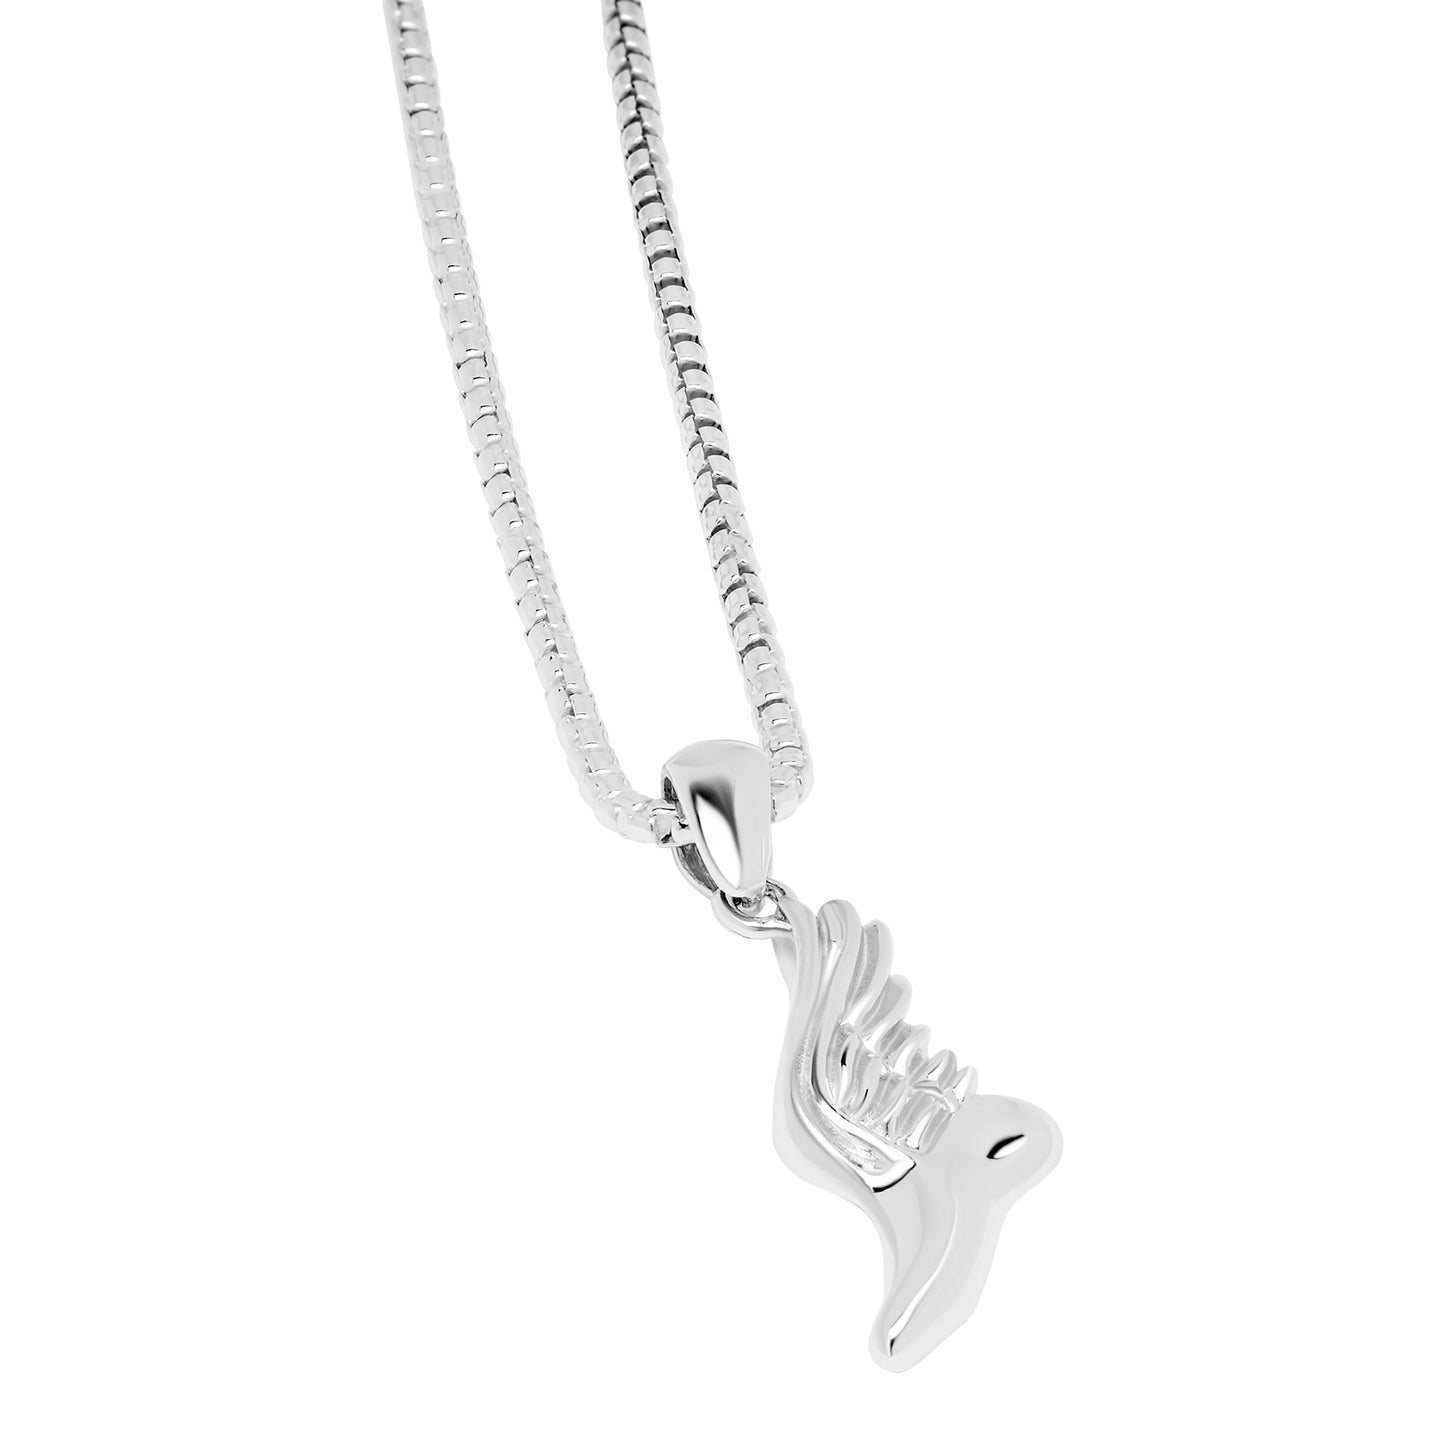 Winged Foot Pendant + Chain - Minted New York